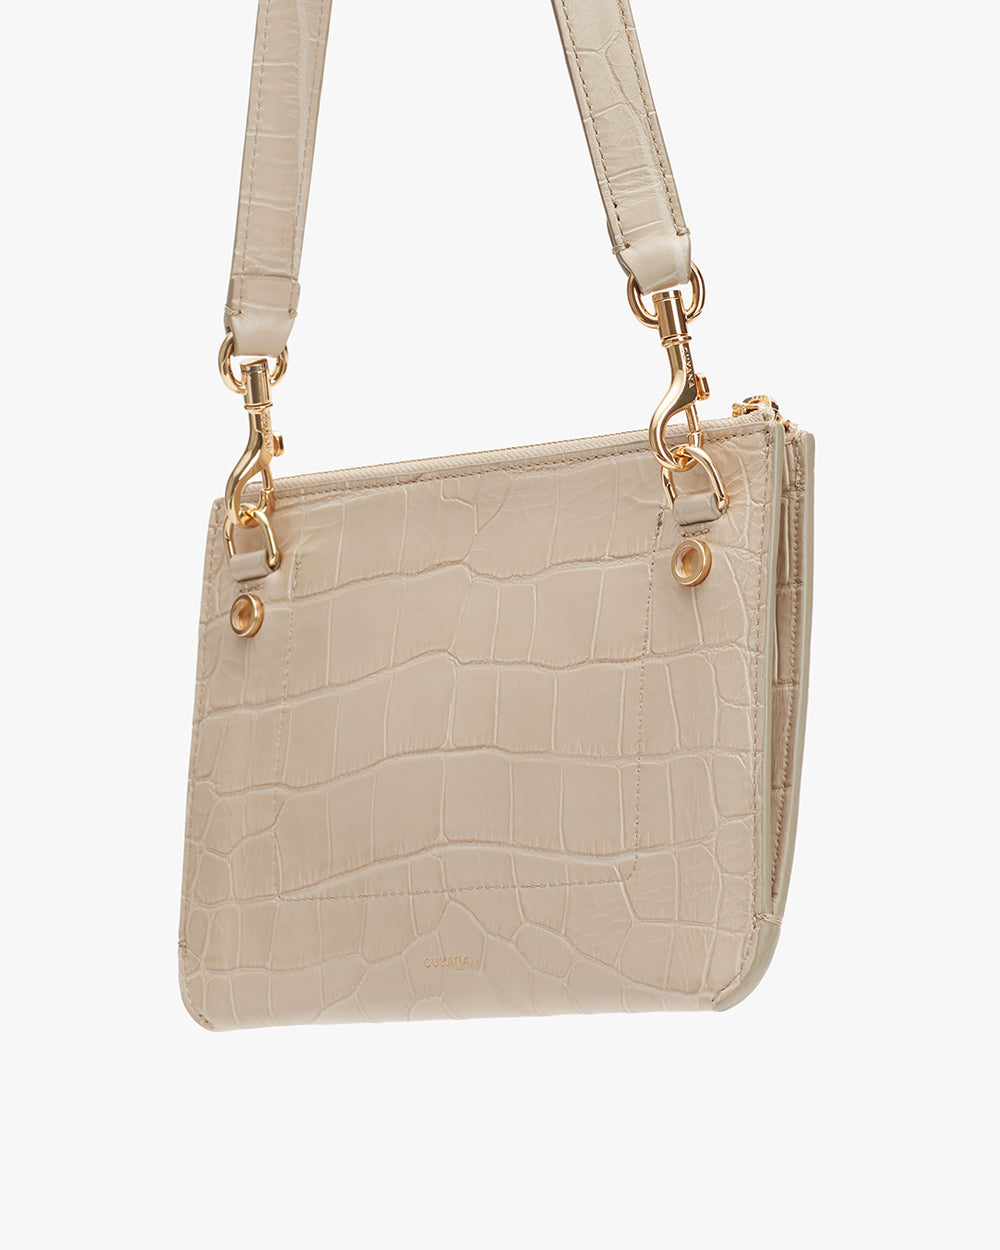 Handbag with strap and clasp details hanging against a solid background.